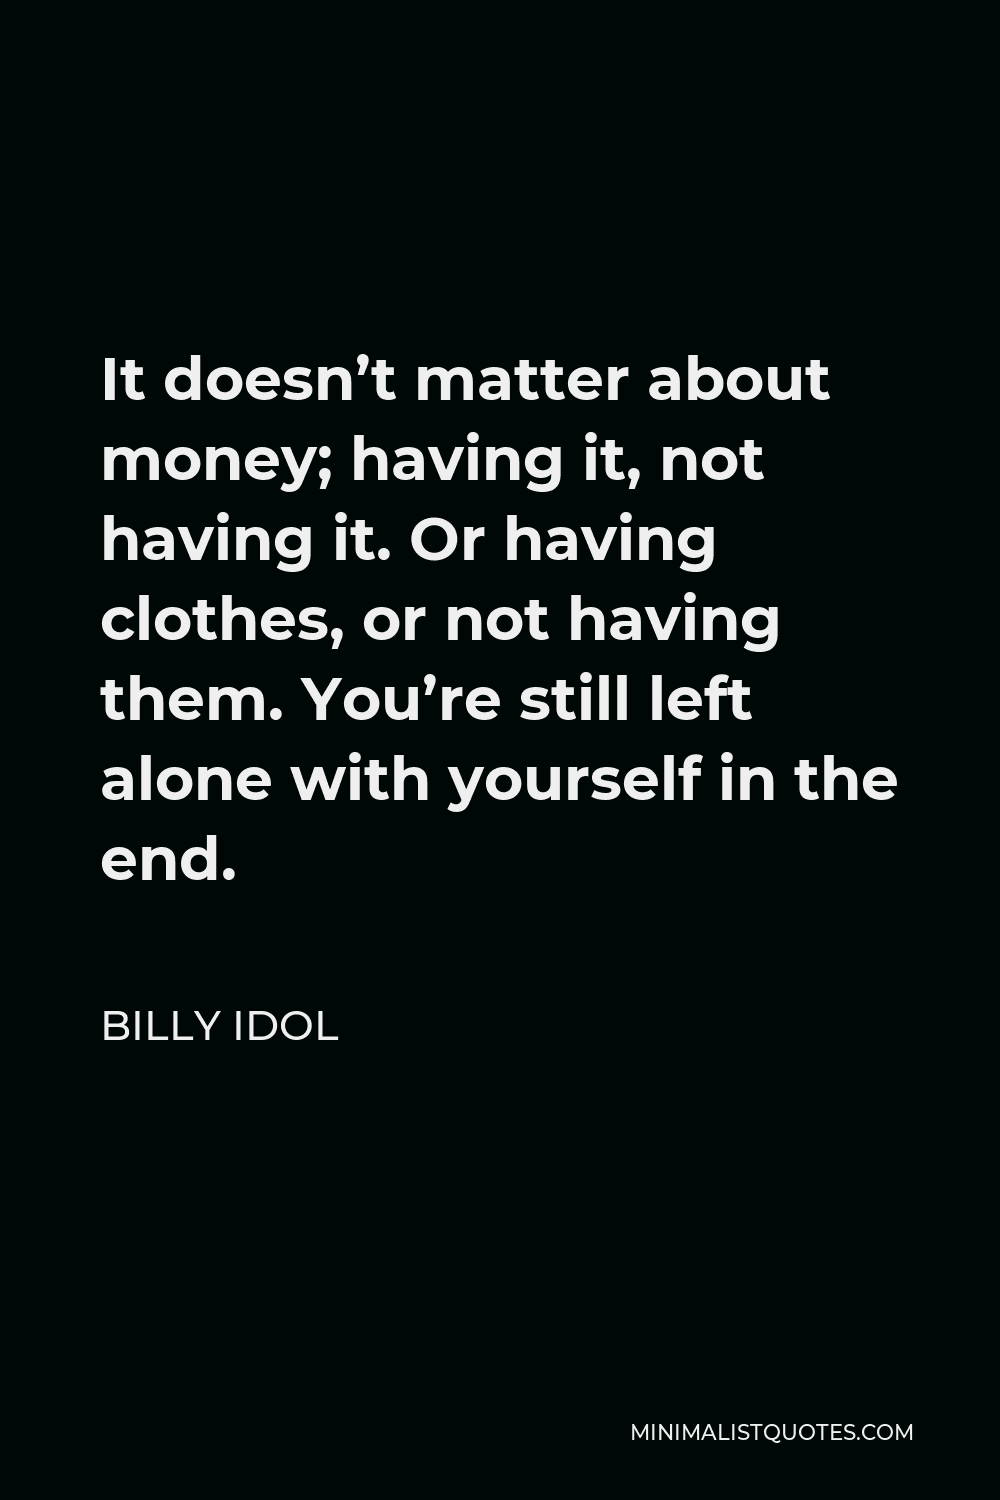 Billy Idol Quote - It doesn’t matter about money; having it, not having it. Or having clothes, or not having them. You’re still left alone with yourself in the end.